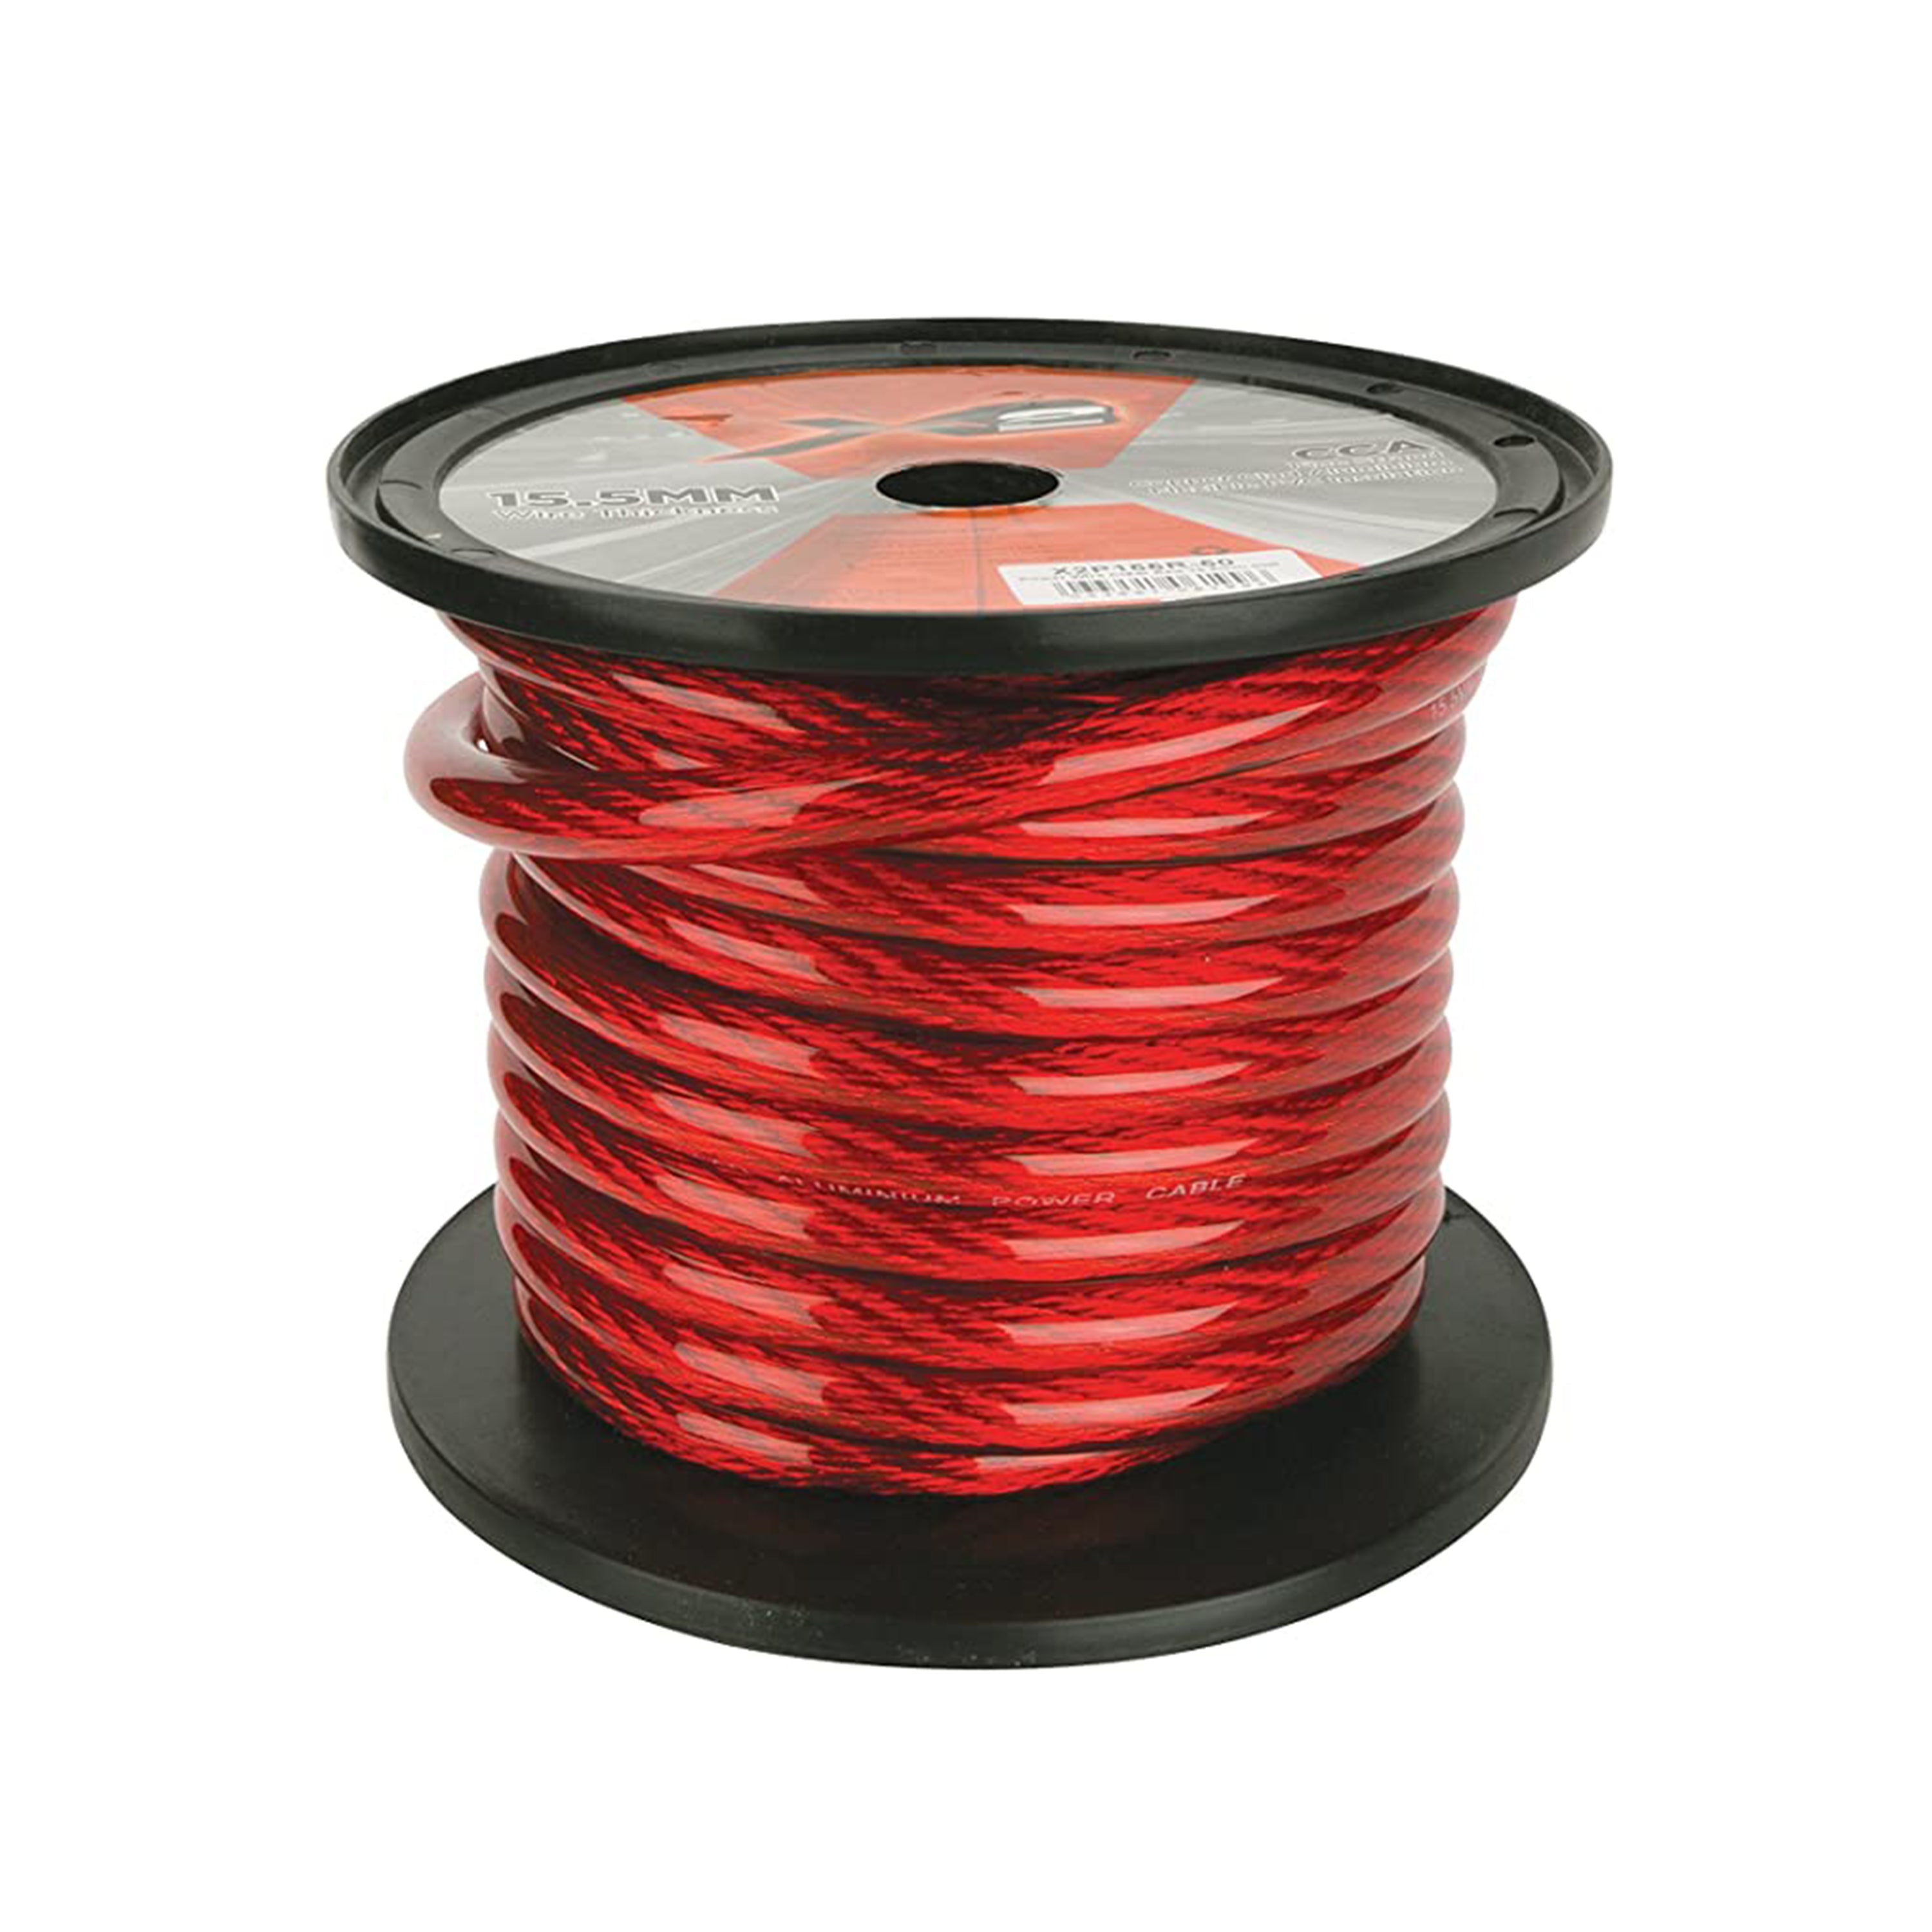 X2 by Scosche X2P155R-50, 15.5mm Red Power Wire Spool - 50 Ft.